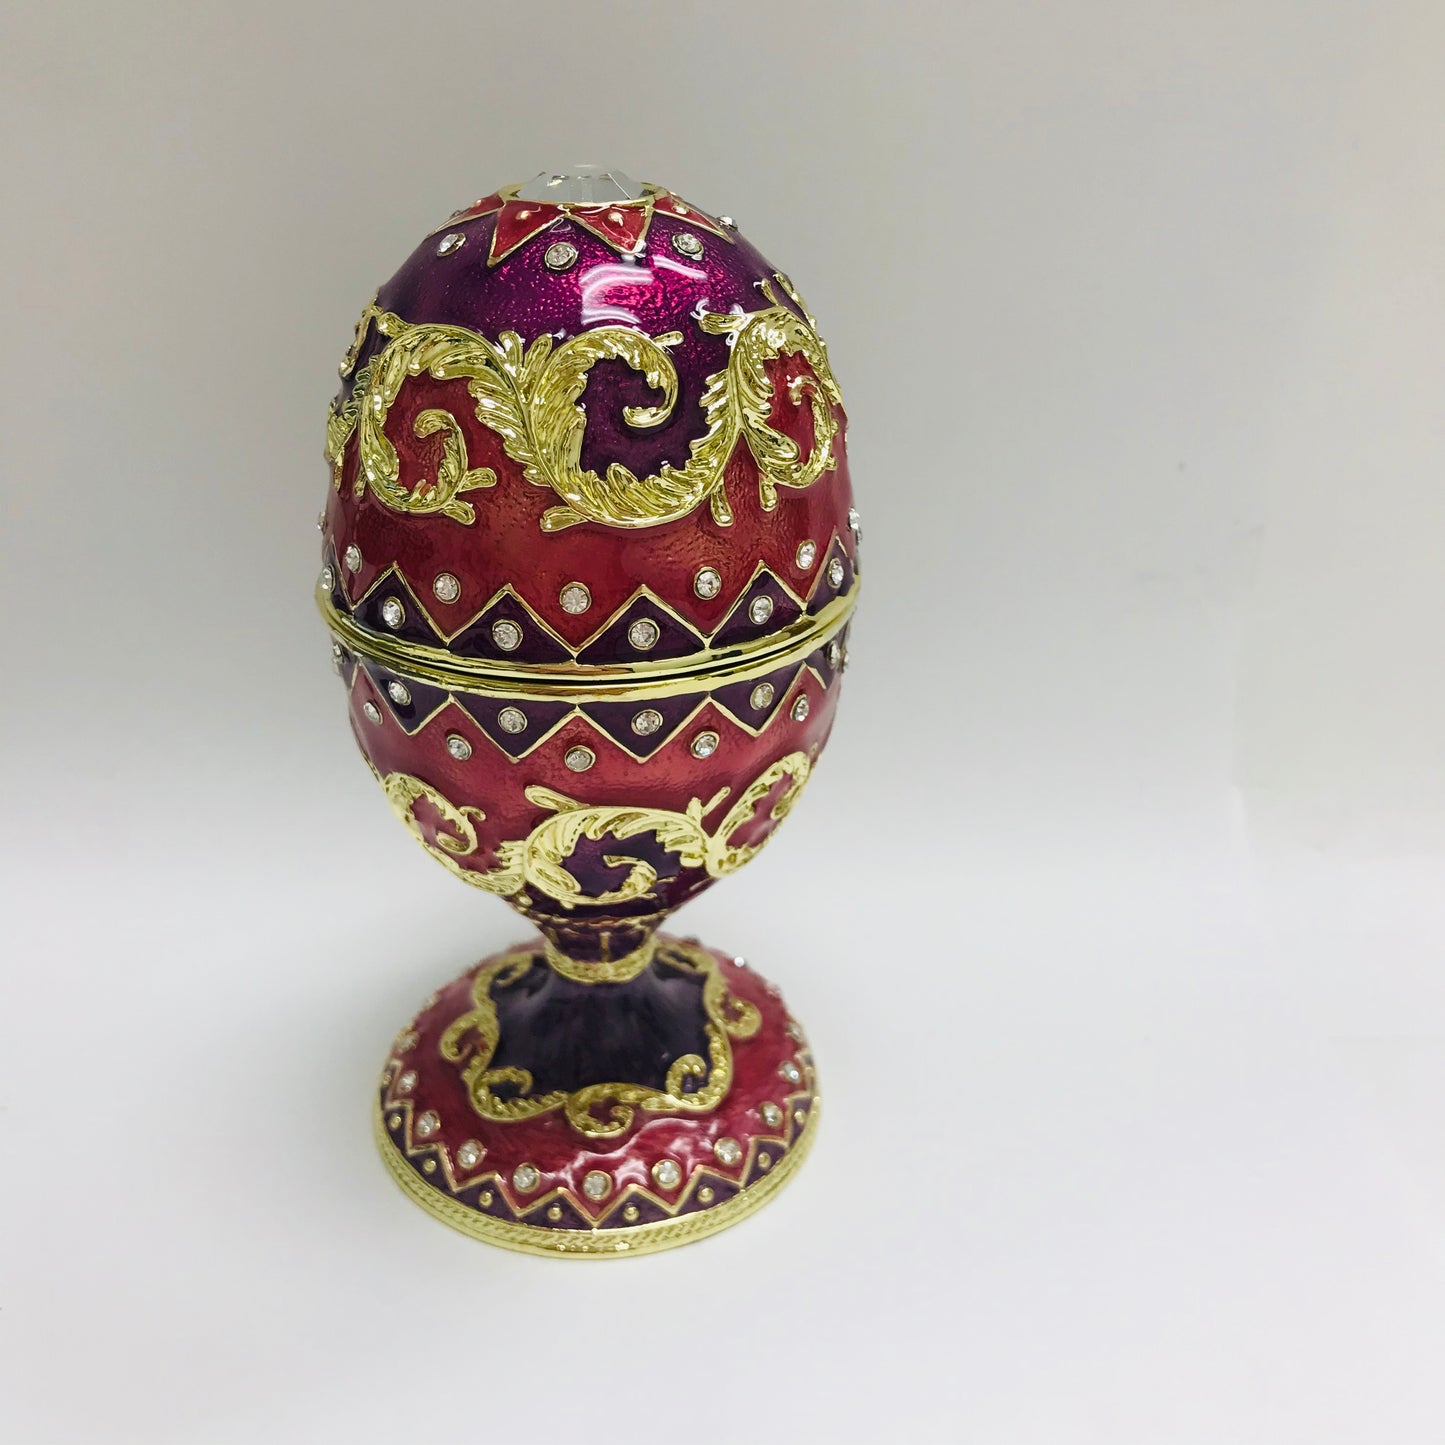 Cristiani Collection Pink Purple Gold Musical Egg Trinket Box.